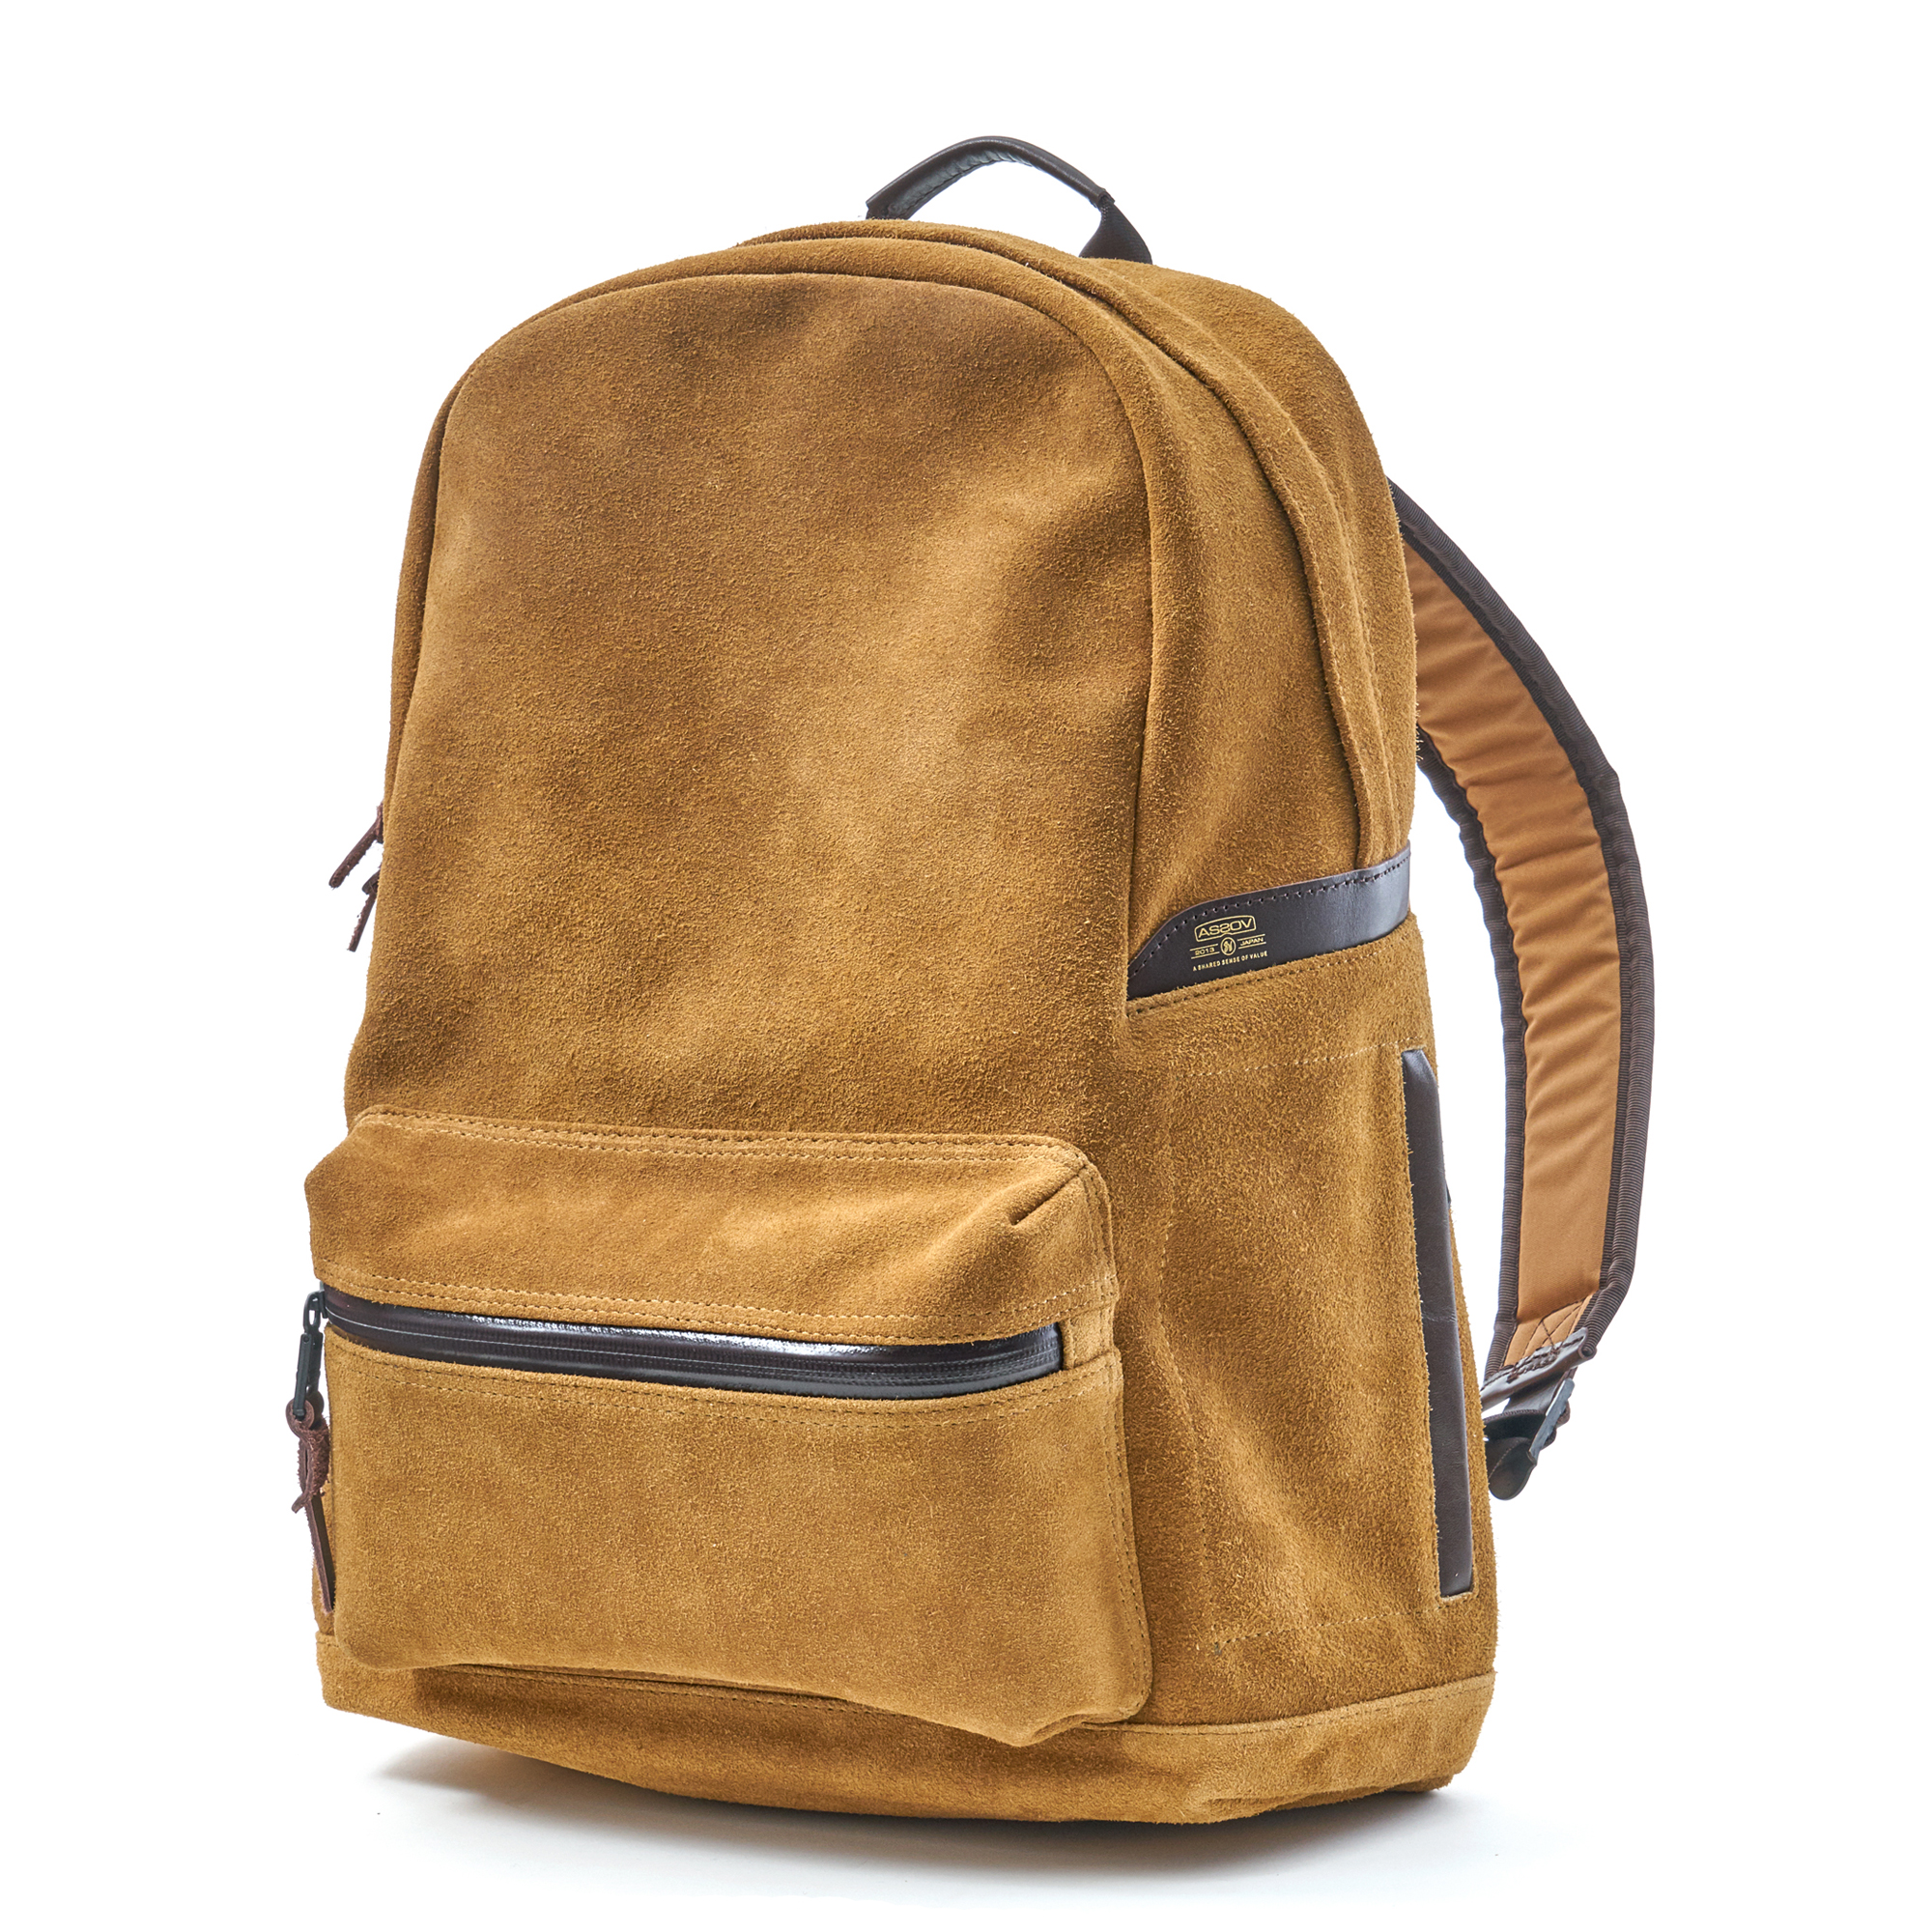 WATER PROOF SUEDE DAY PACK